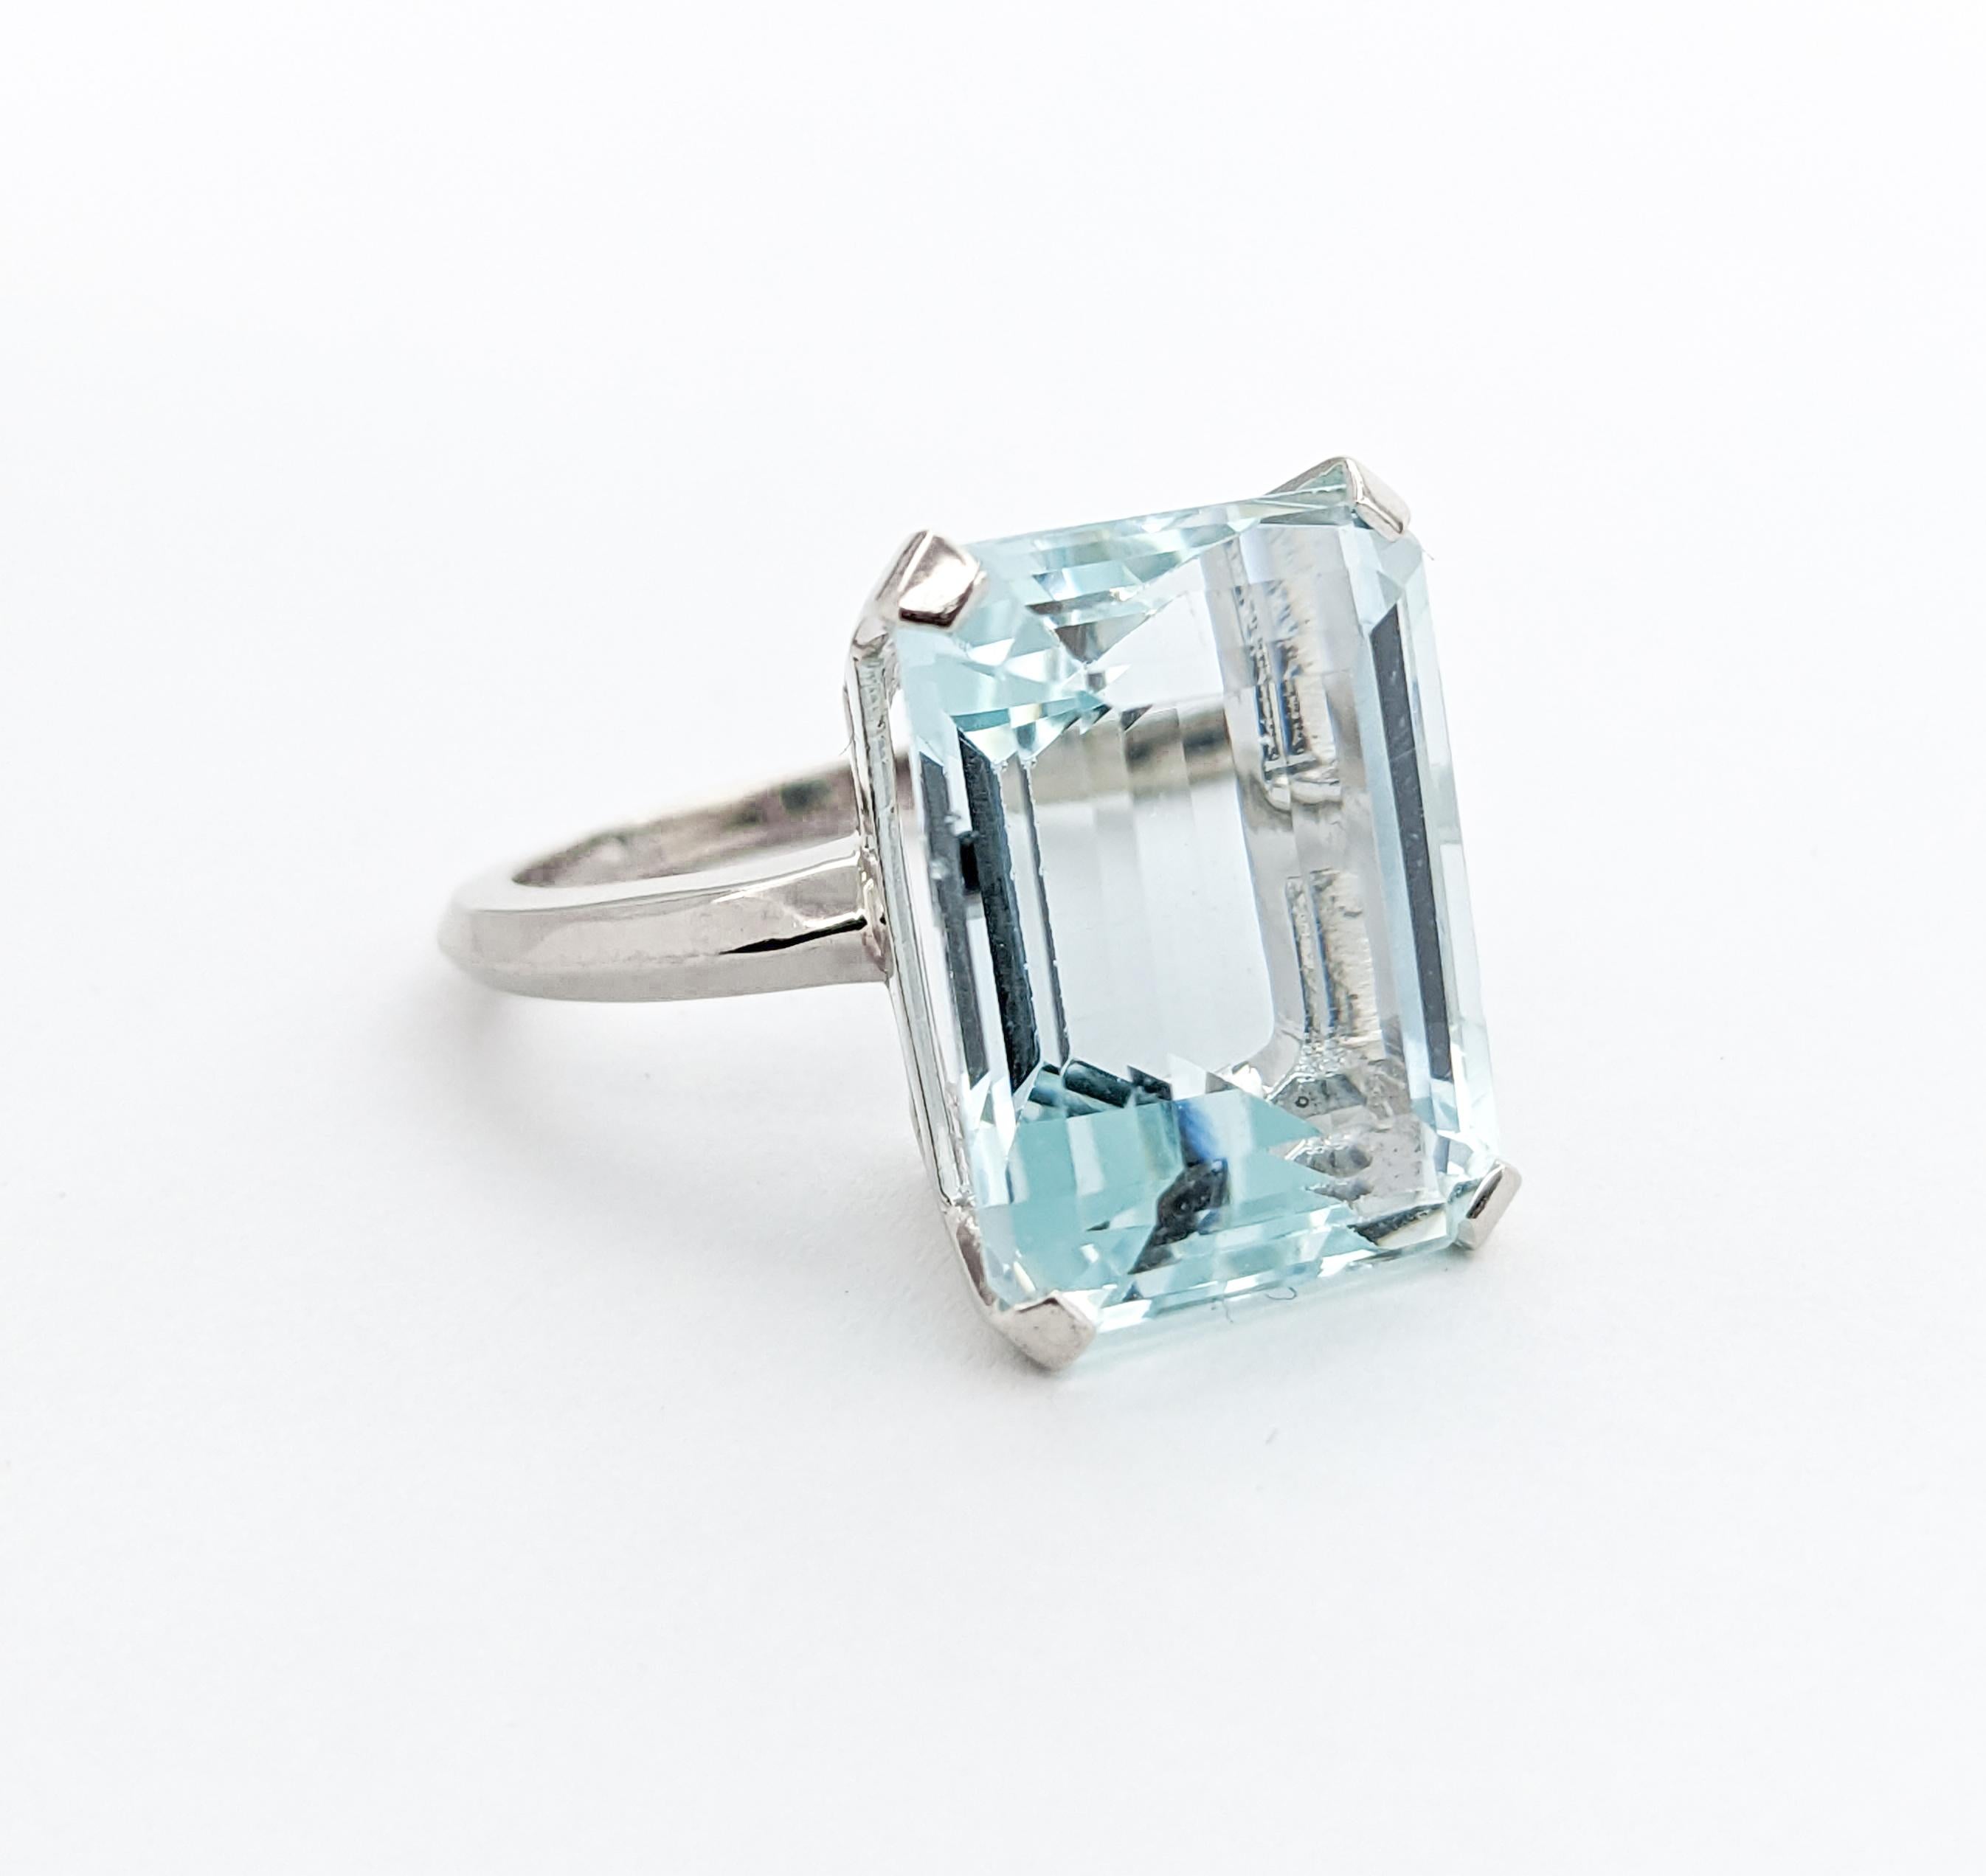 16.5ct Emerald Cut Aquamarine Cocktail Ring In White Gold In Excellent Condition For Sale In Bloomington, MN